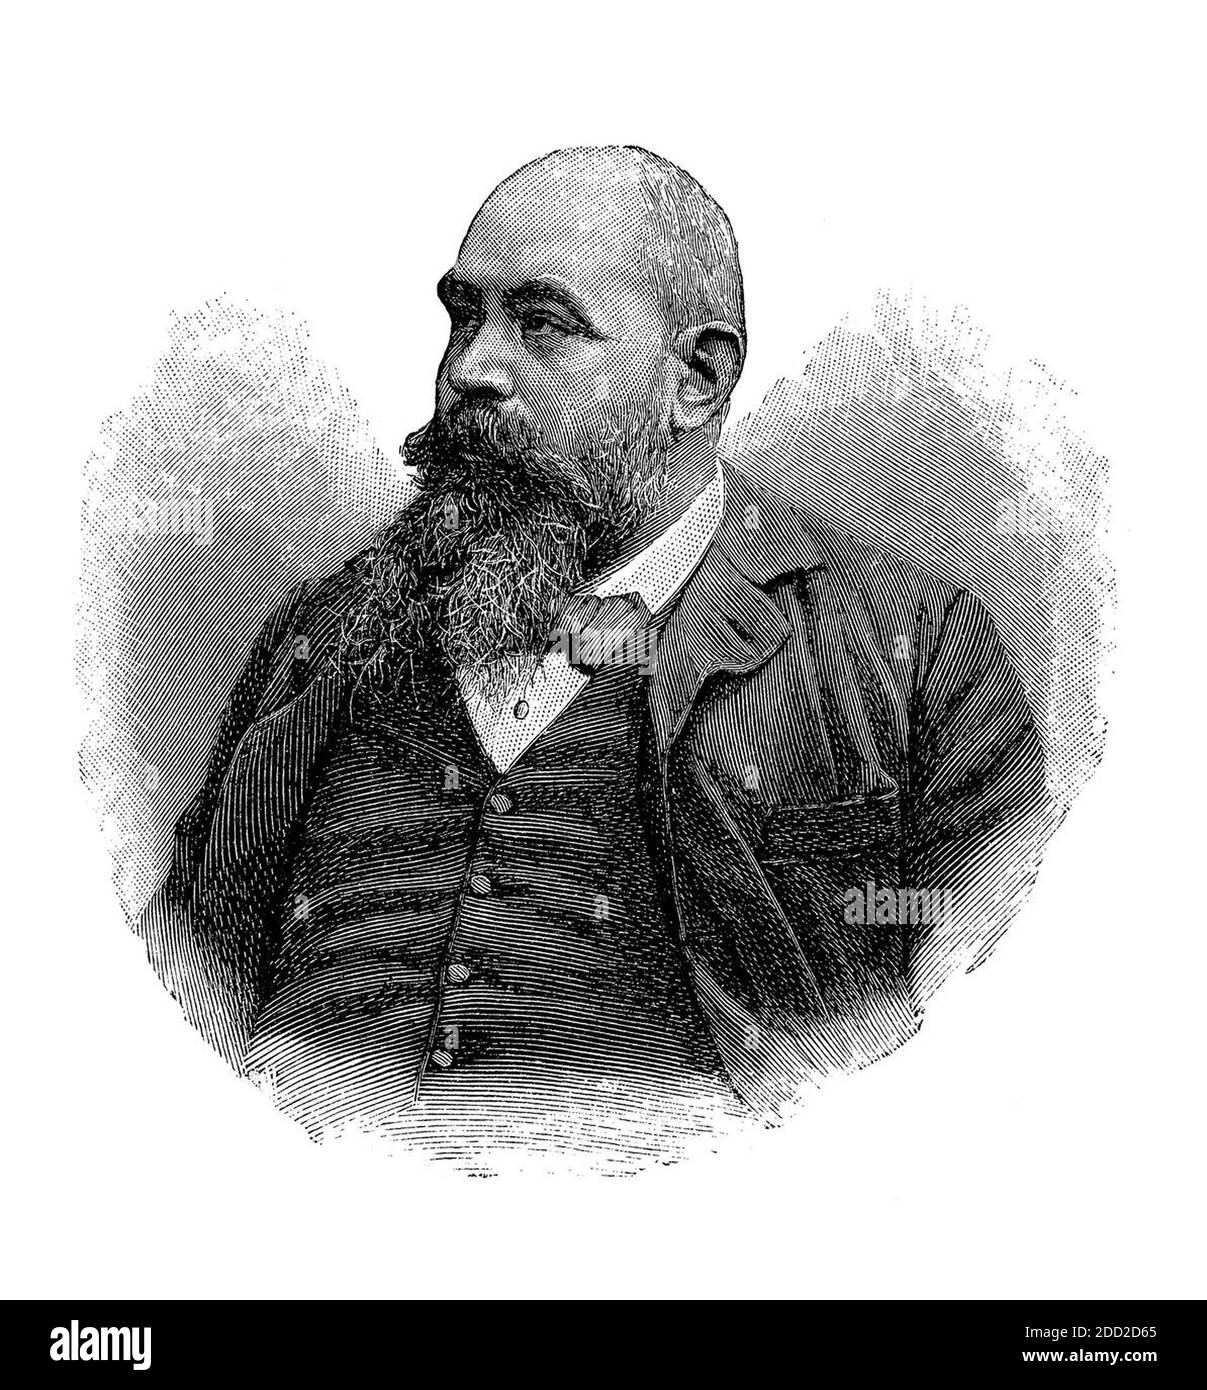 1895 ca, ITALY : The celebrated italian playwriter, dramatist and poet GIUSEPPE GIACOSA ( 1847 – 1906 )  . Giacosa was the author of Giacomo Puccini librettos for LA BOHEME ,  TOSCA and MADAMA BUTTERFLY  with Luigi Illica . He wrote LA DAME DE CHALLANT for French actress Sarah Bernhardt ,  New York , 1891. His play most celebrated is COME LE FOGLIE (1900). -  SCAPIGLIATURA MILANESE - LIRICA - MUSICA classica - classical - musicista - musician - portrait - ritratto -  beard - barba - BELLE EPOQUE - gilet - gilè - panciotto - tie - cravatta - POET - POETA - POETRY - POESIA - LETTERATURA - LITTER Stock Photo